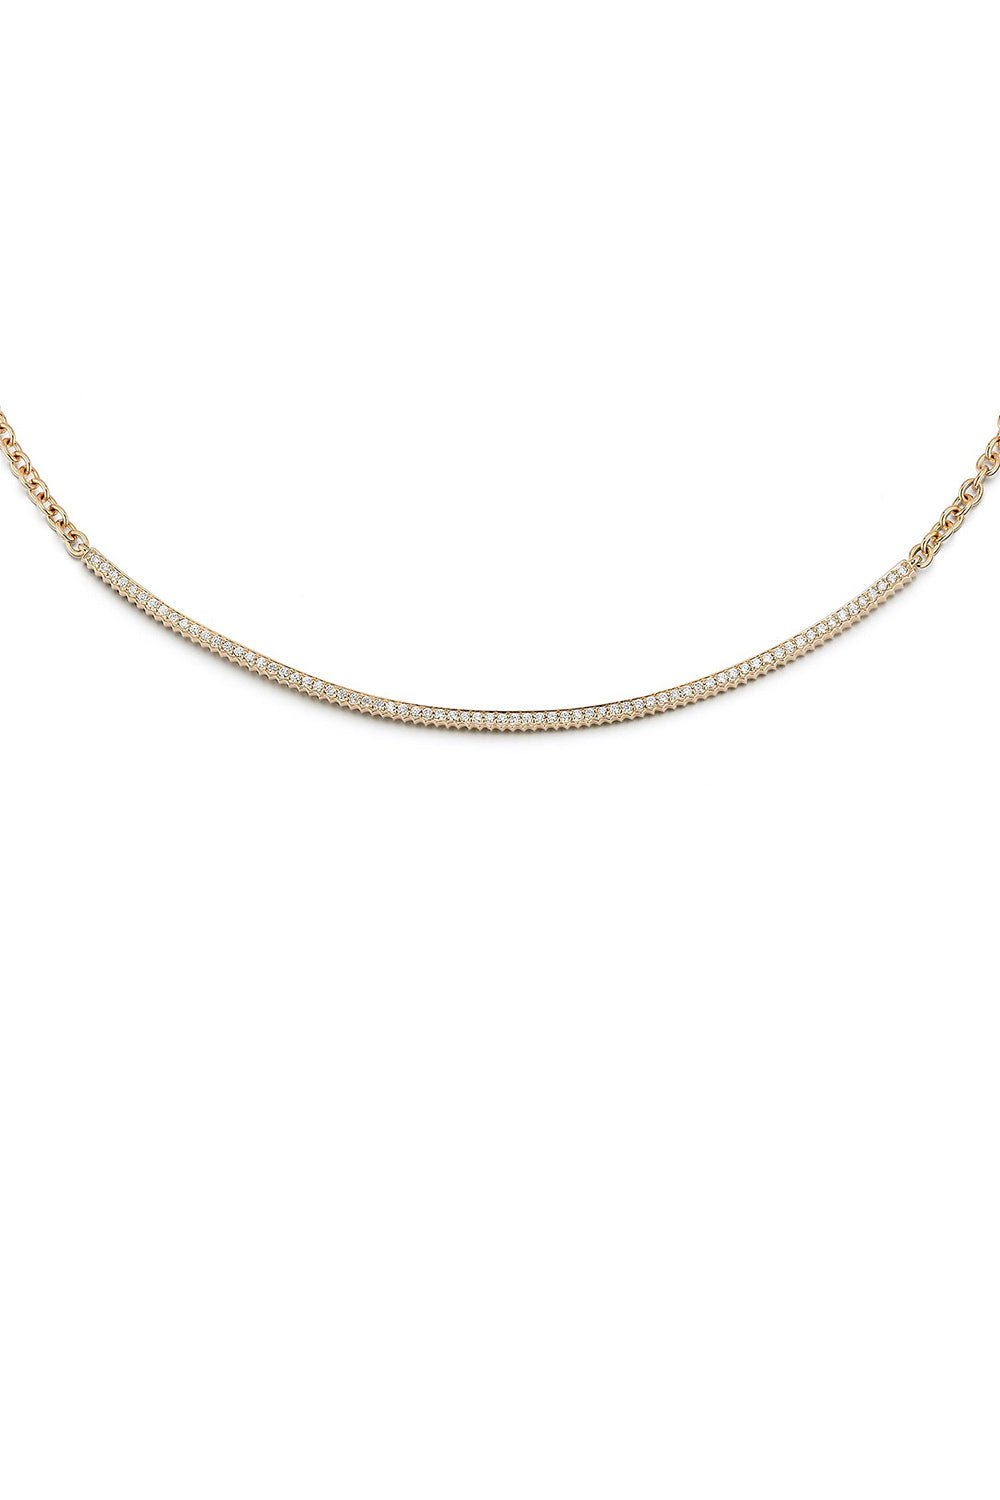 WALTERS FAITH-Clive Fluted Bar Necklace-ROSE GOLD